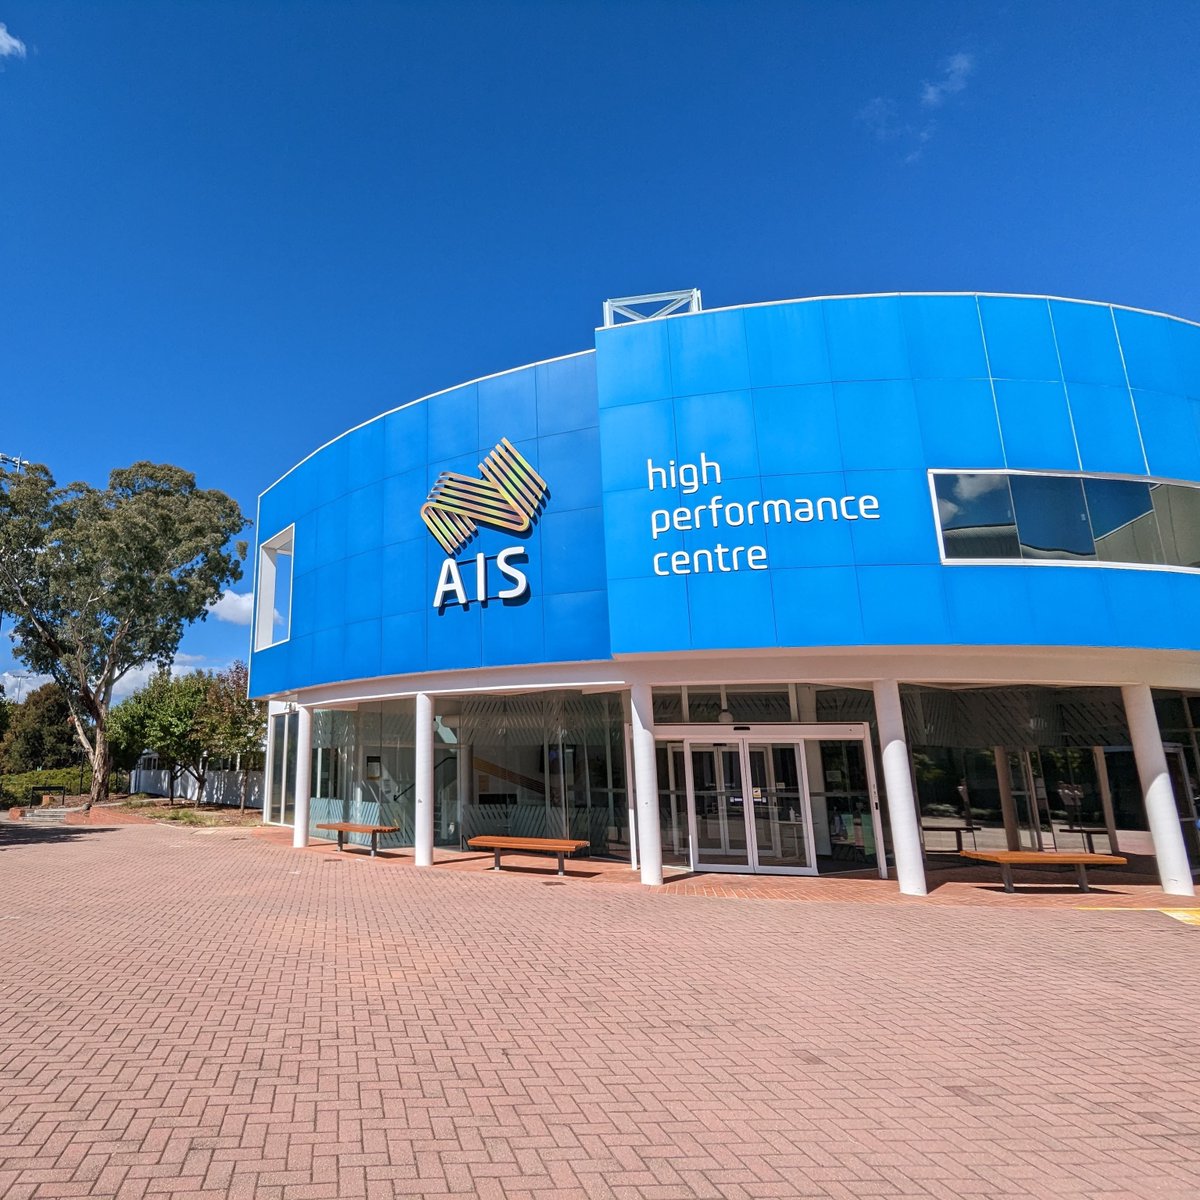 Today was a fantastic day at work! Thrilled to welcome Dr David Borg (@elborgo9) to the @theAIS as our new Scientific Advisor - Performance Health. Looking forward to working together, supporting Australian athletes and teams to win well. #PerformanceHealth #WelcomeAboard